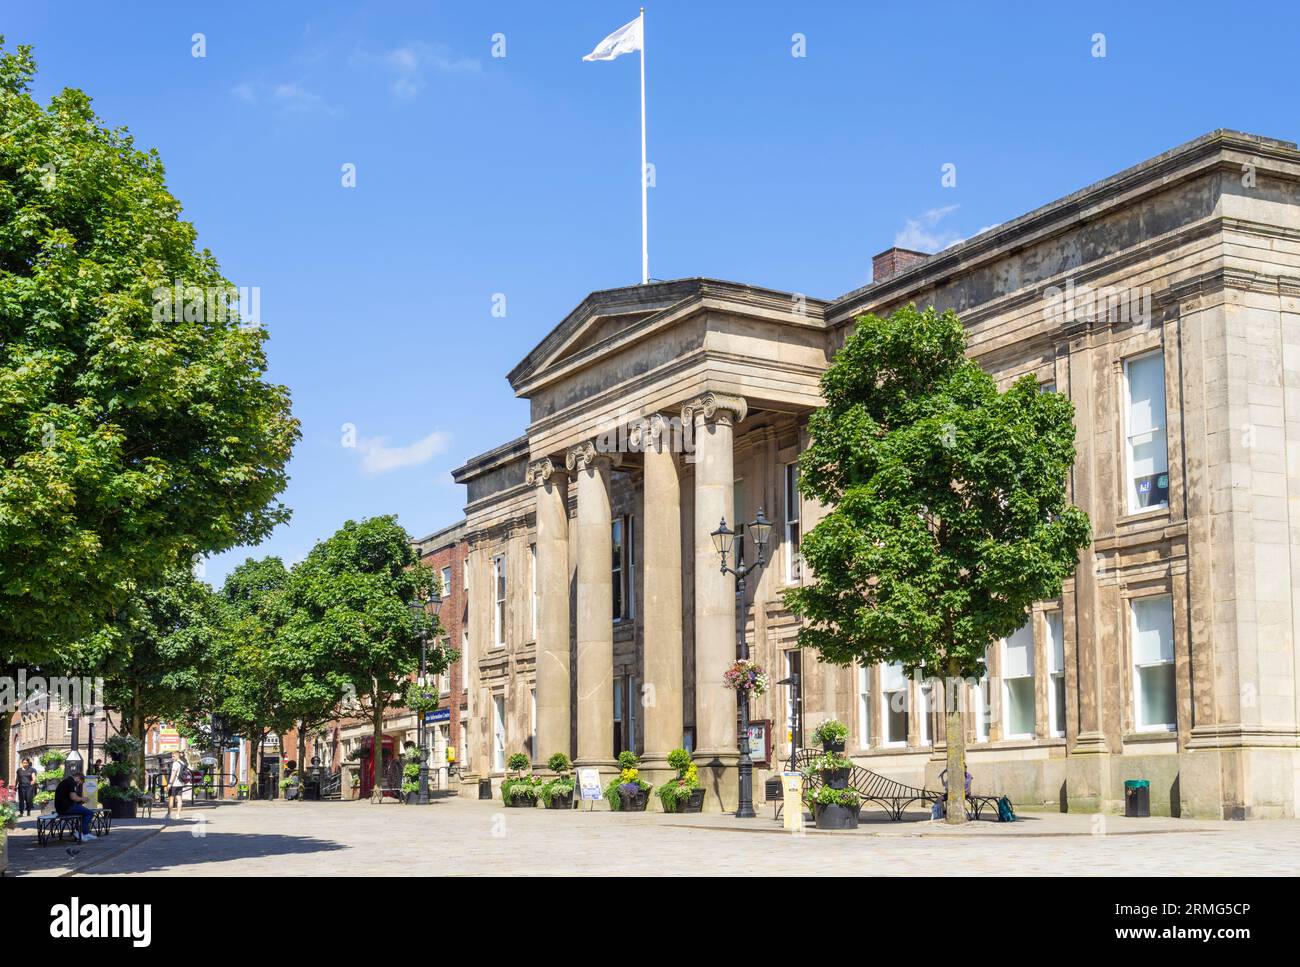 Macclesfield Town Hall in Macclesfield Market place Macclesfield Cheshire East England UK GB Europe Stock Photo